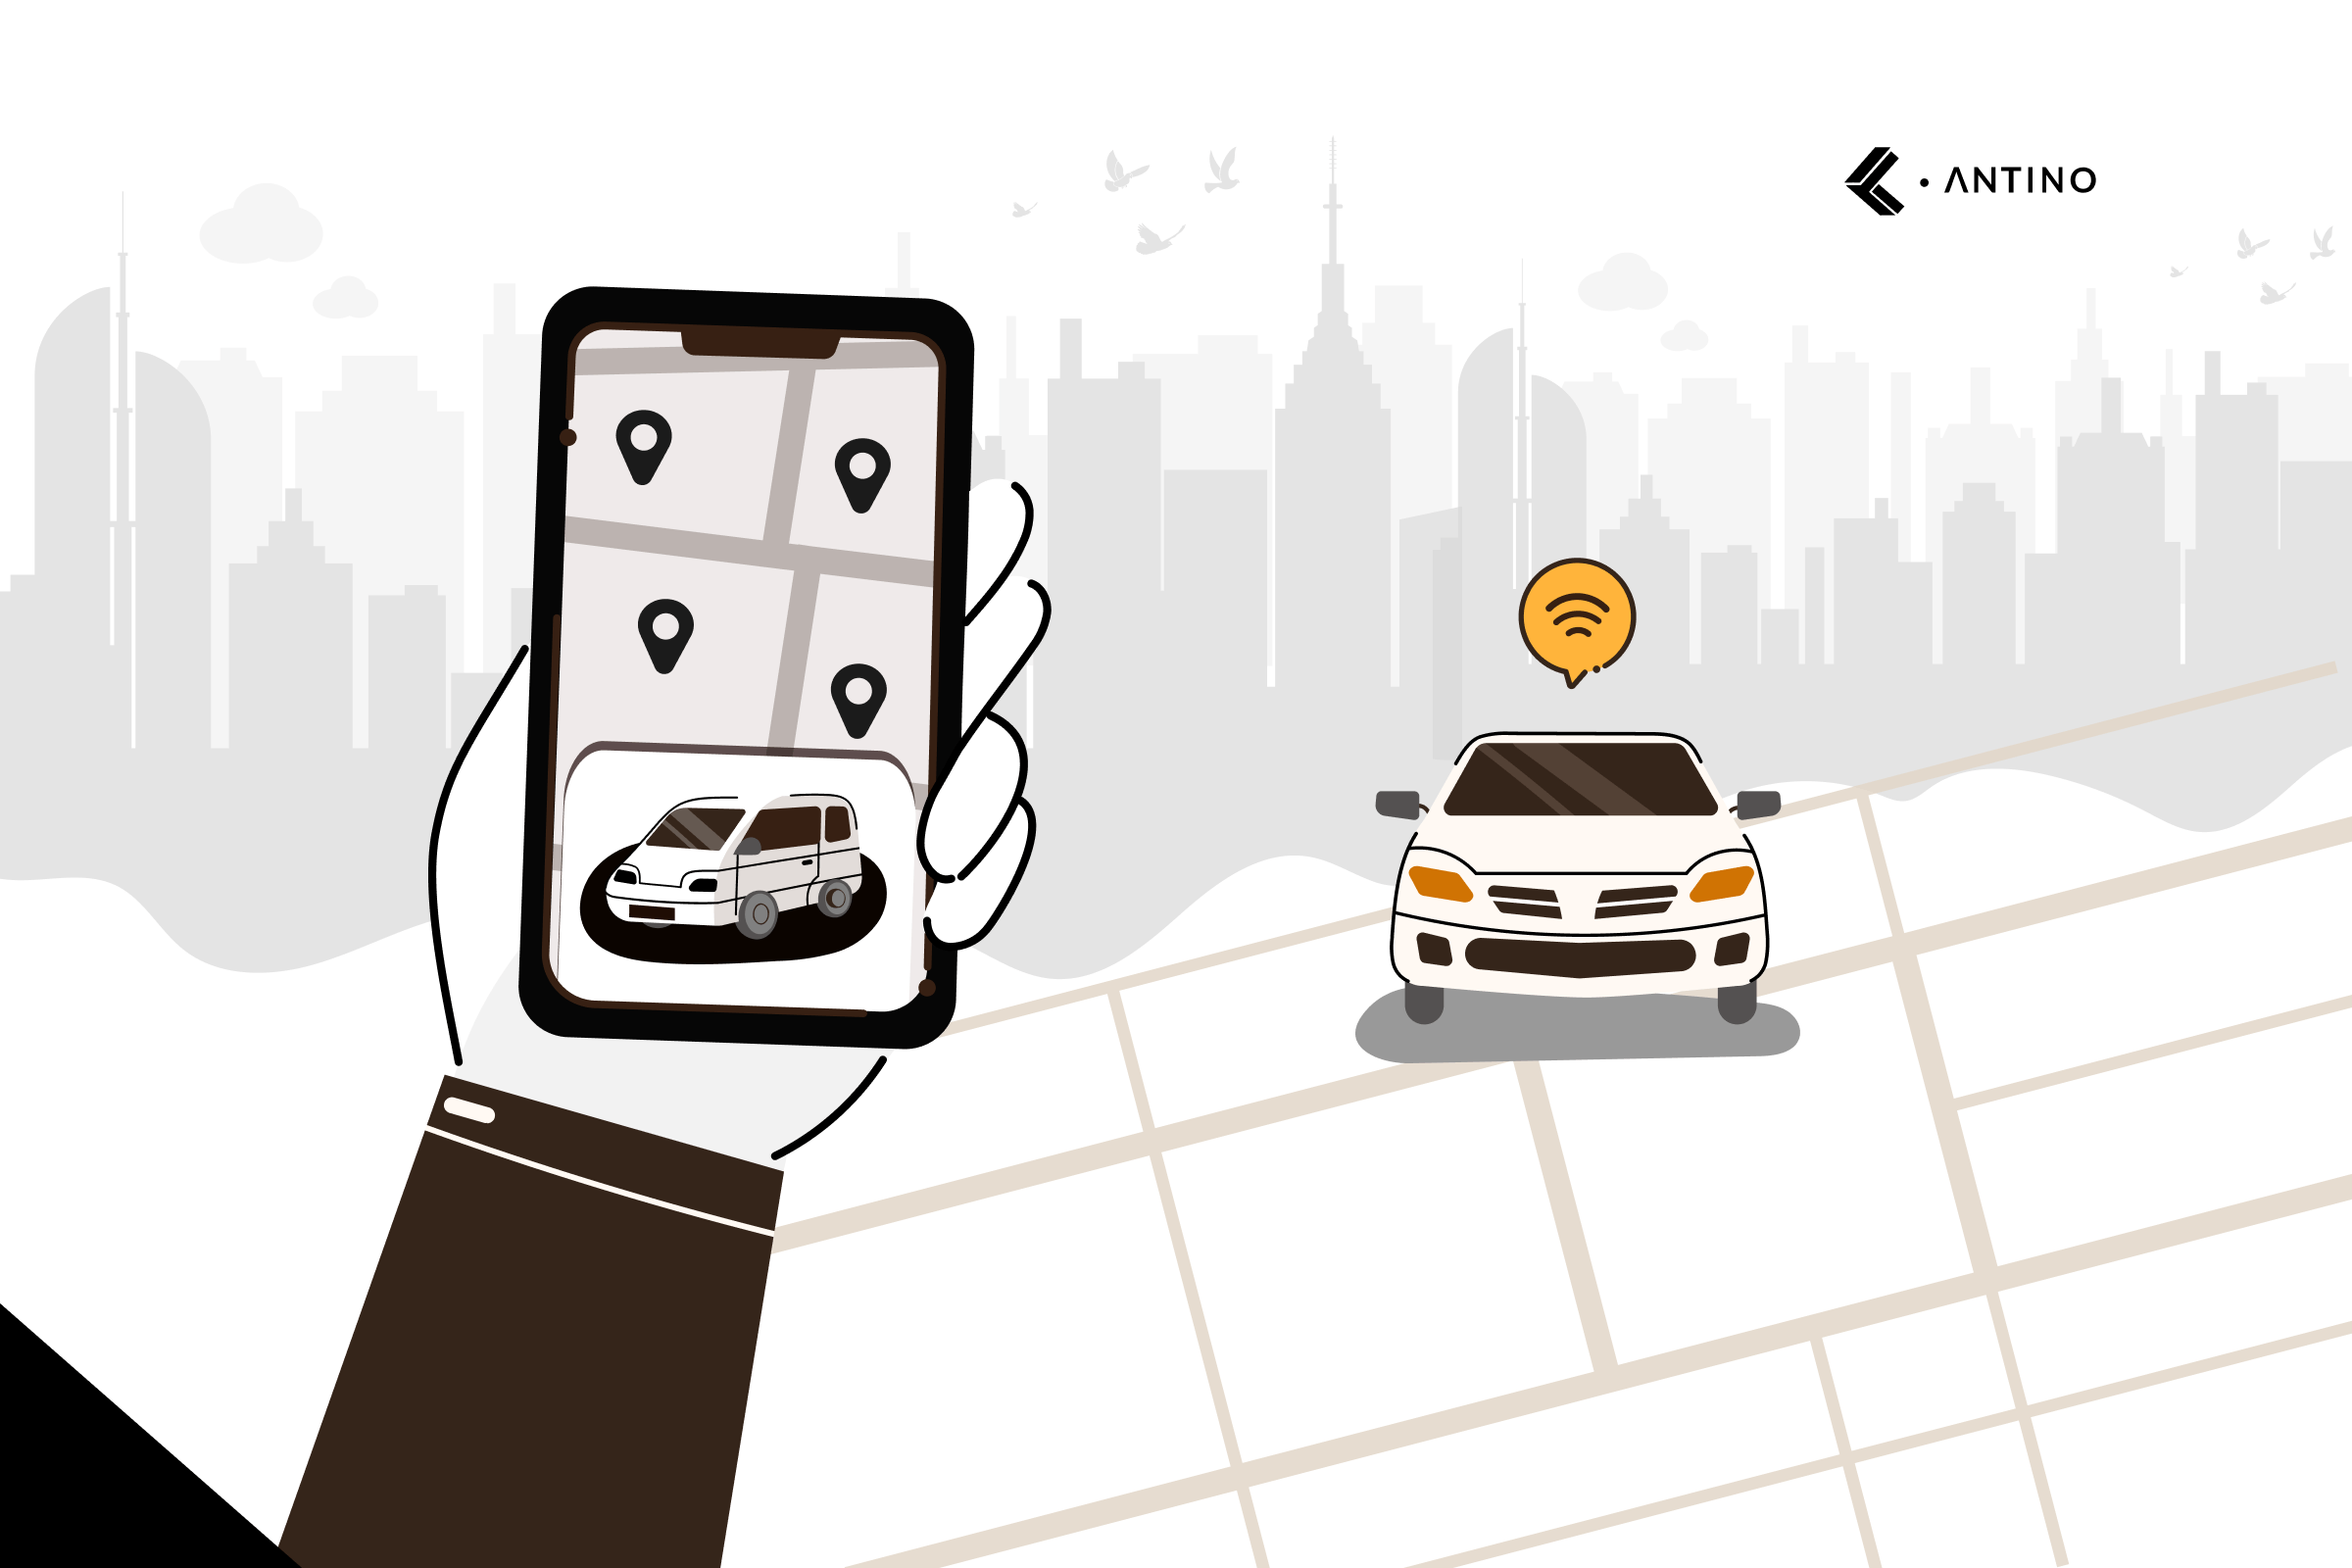 How to build an app like Uber?